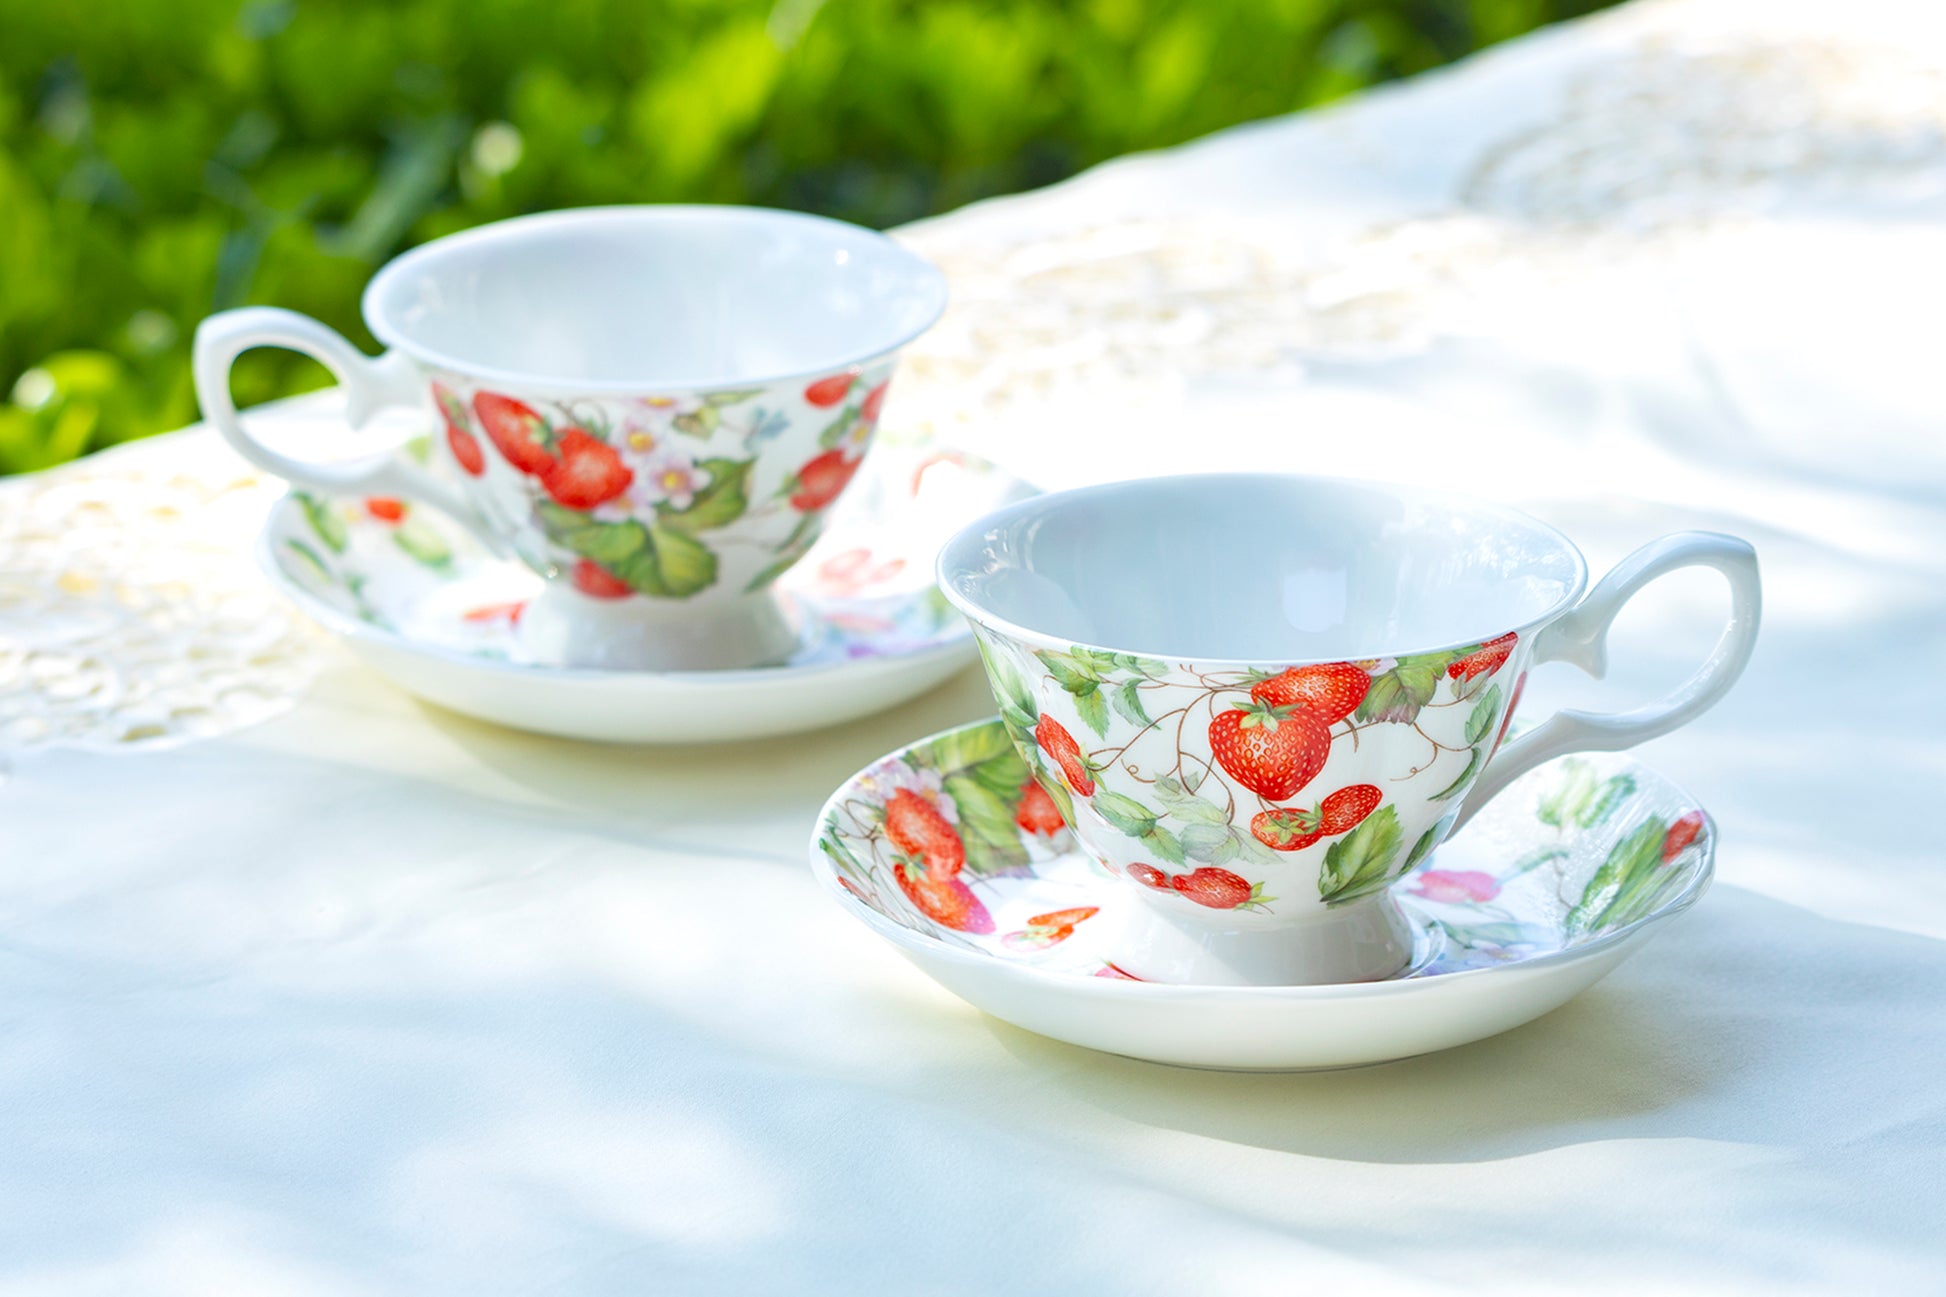 Strawberry Bone China Tea Cup and Saucer, Set of 1 (1 Cup with 1 Saucer)